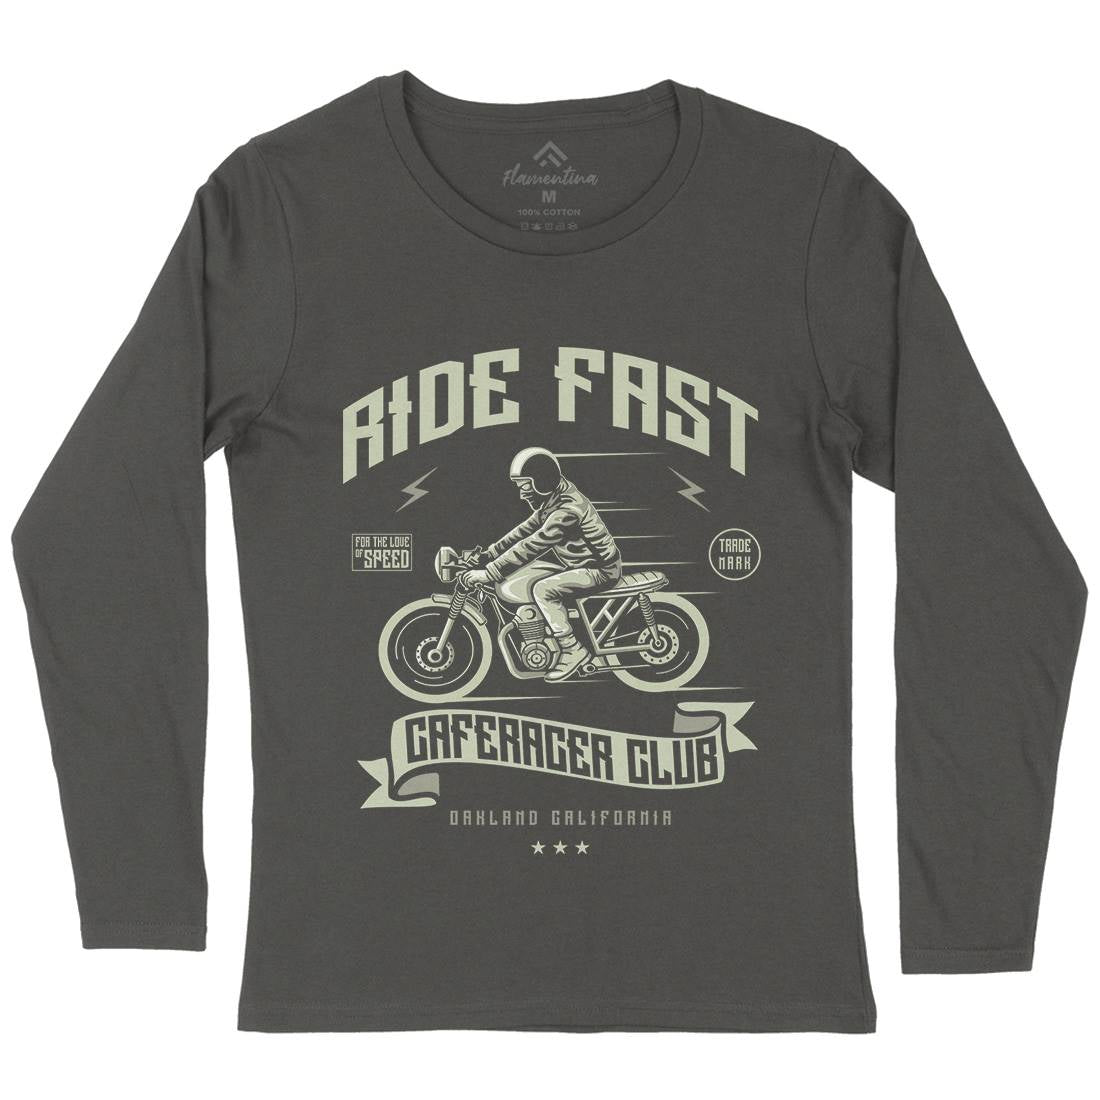 Ride Fast Womens Long Sleeve T-Shirt Motorcycles A117